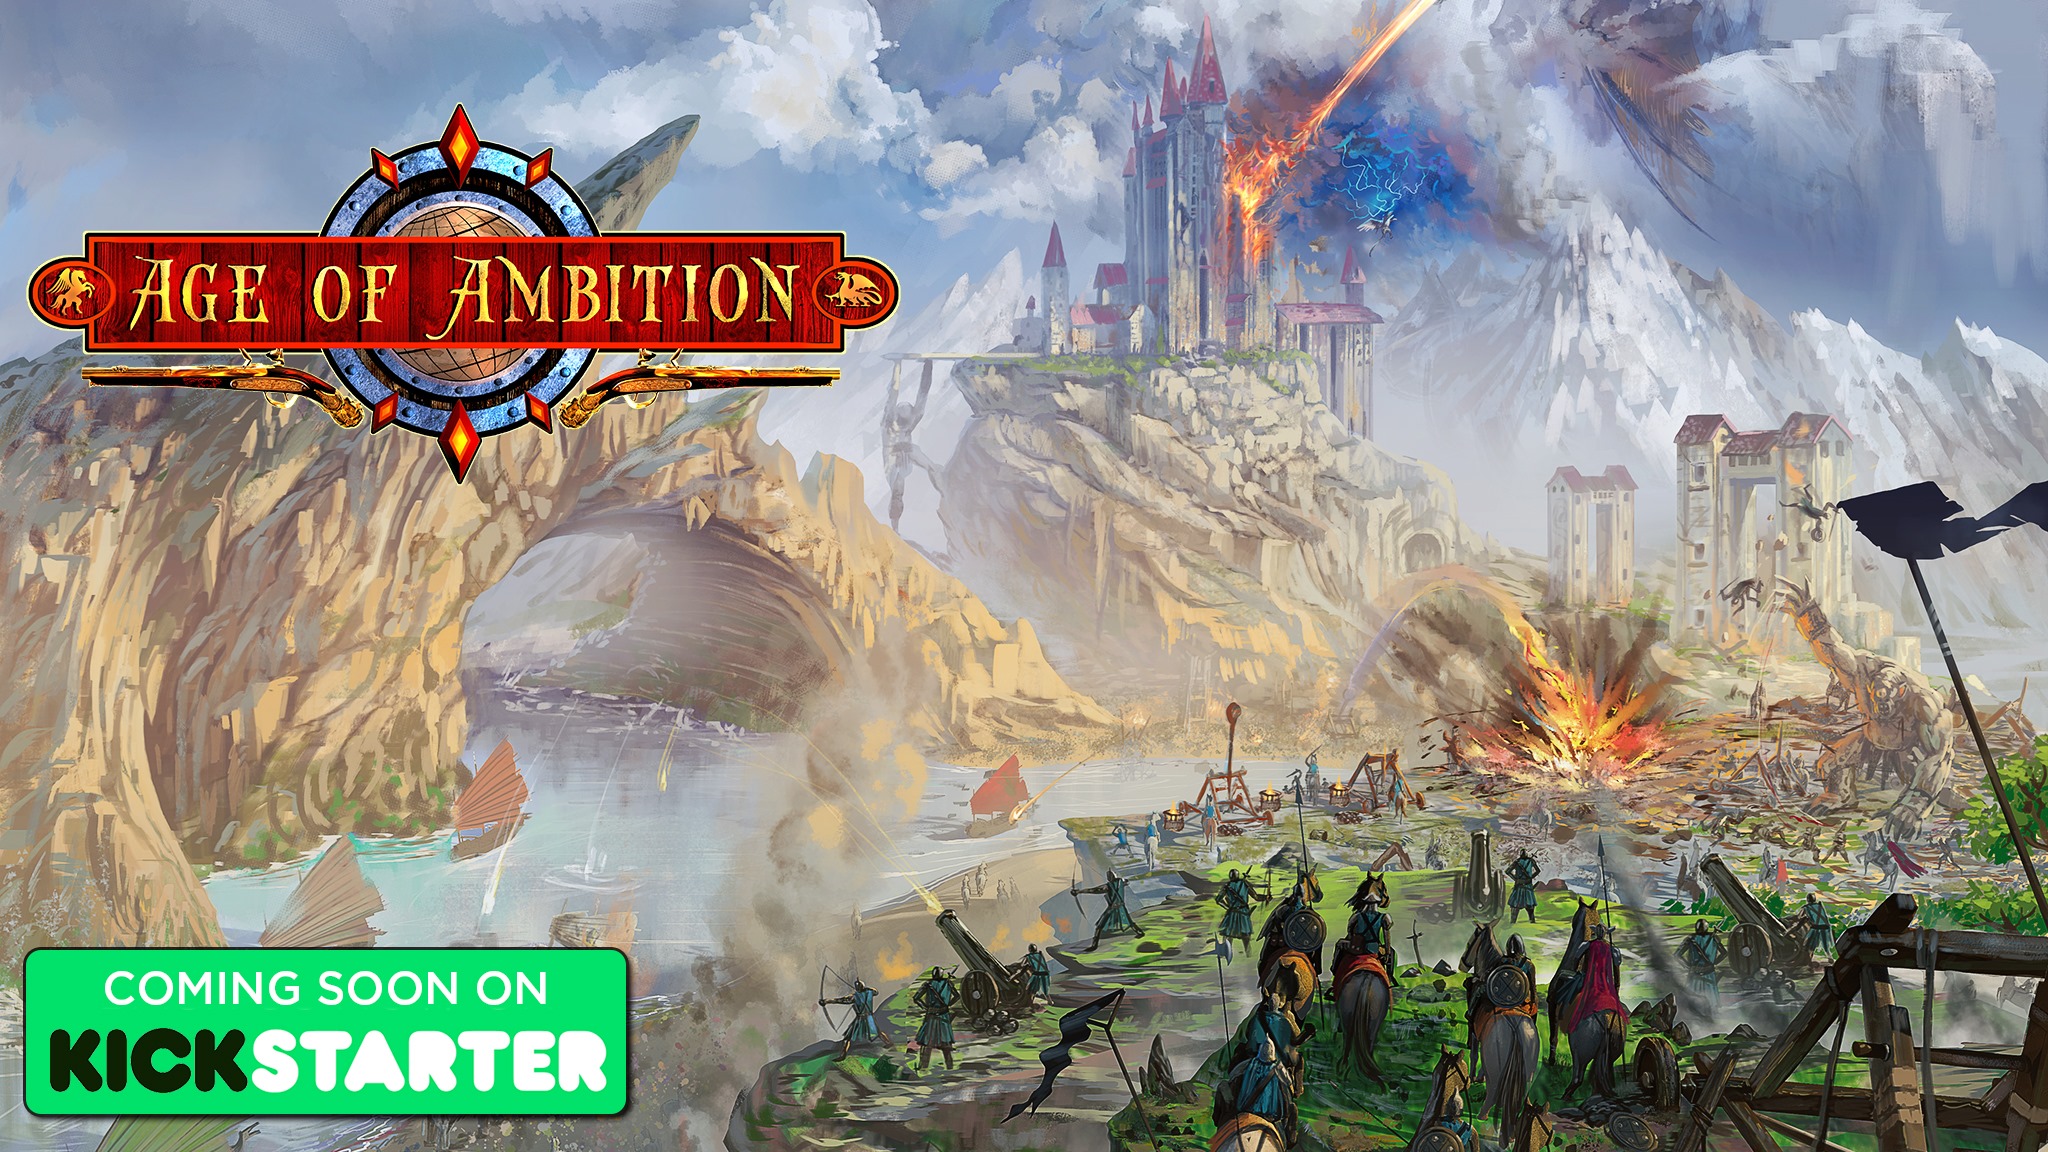 Age of Ambition: Coming Soon to Kickstarter